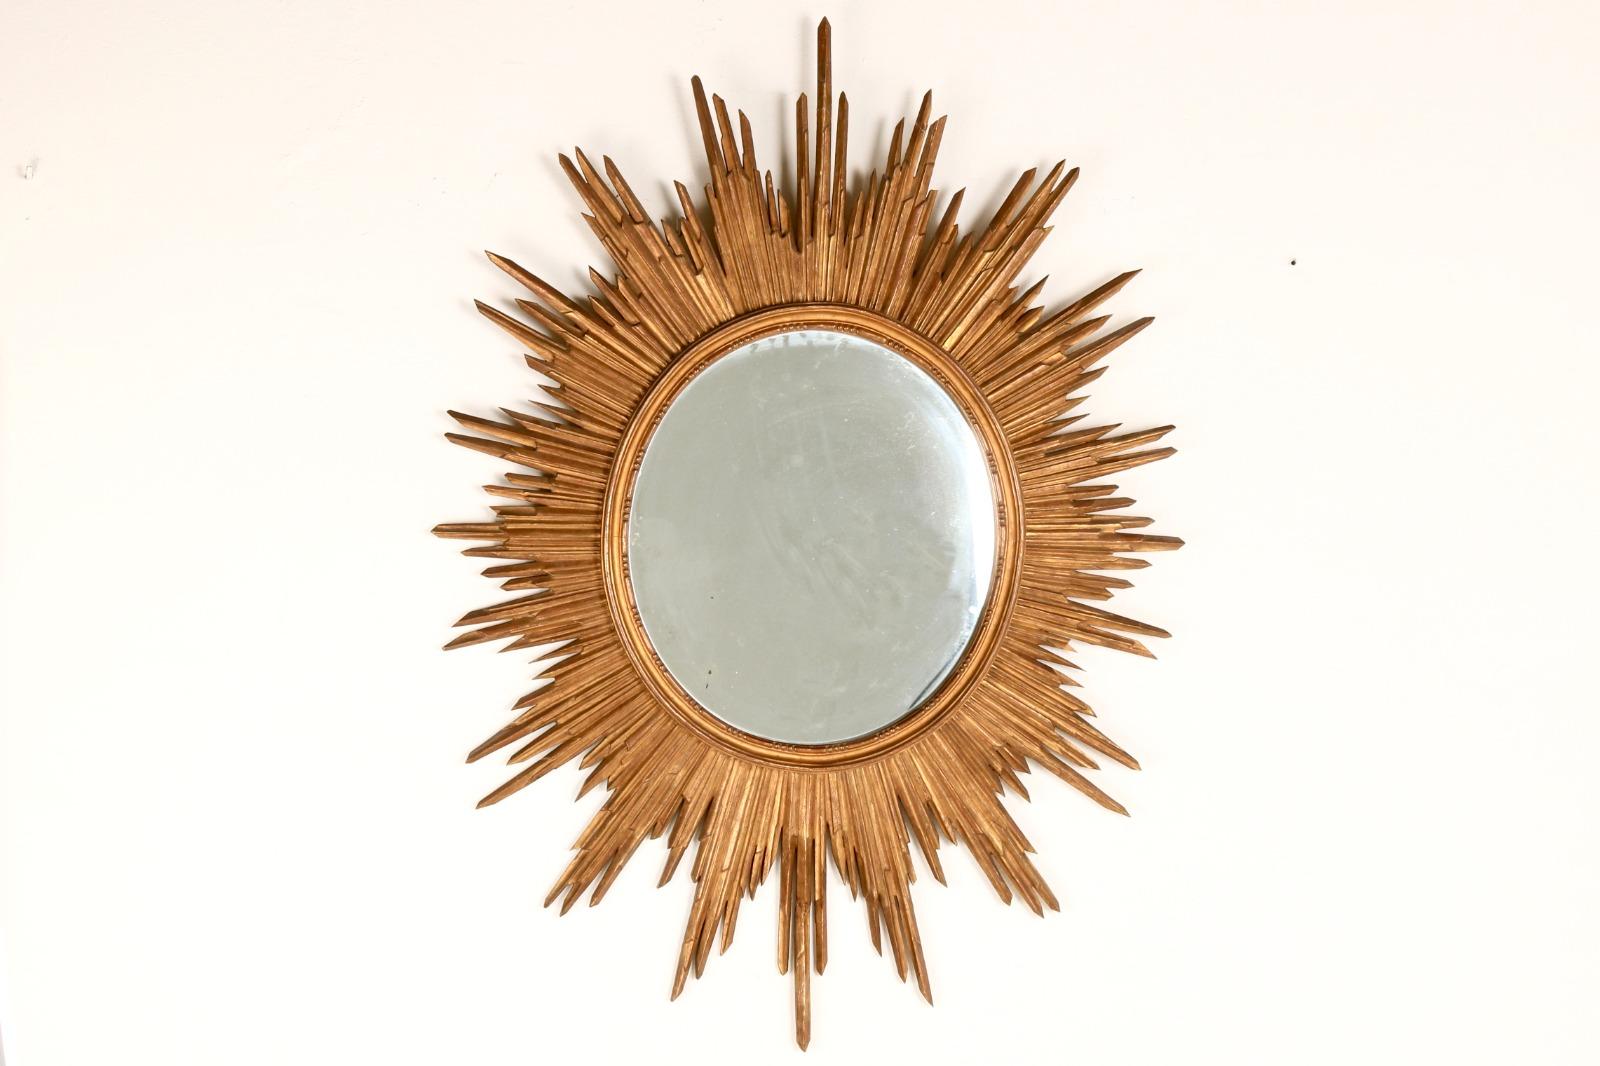 This exquisite Italian-designed wood-framed mirror captivates with its sun-shaped geometry and intricate details. Crafted with extreme mastery, the mirror's geometric shapes, harmoniously integrated into the wood-frame, creating a striking visual